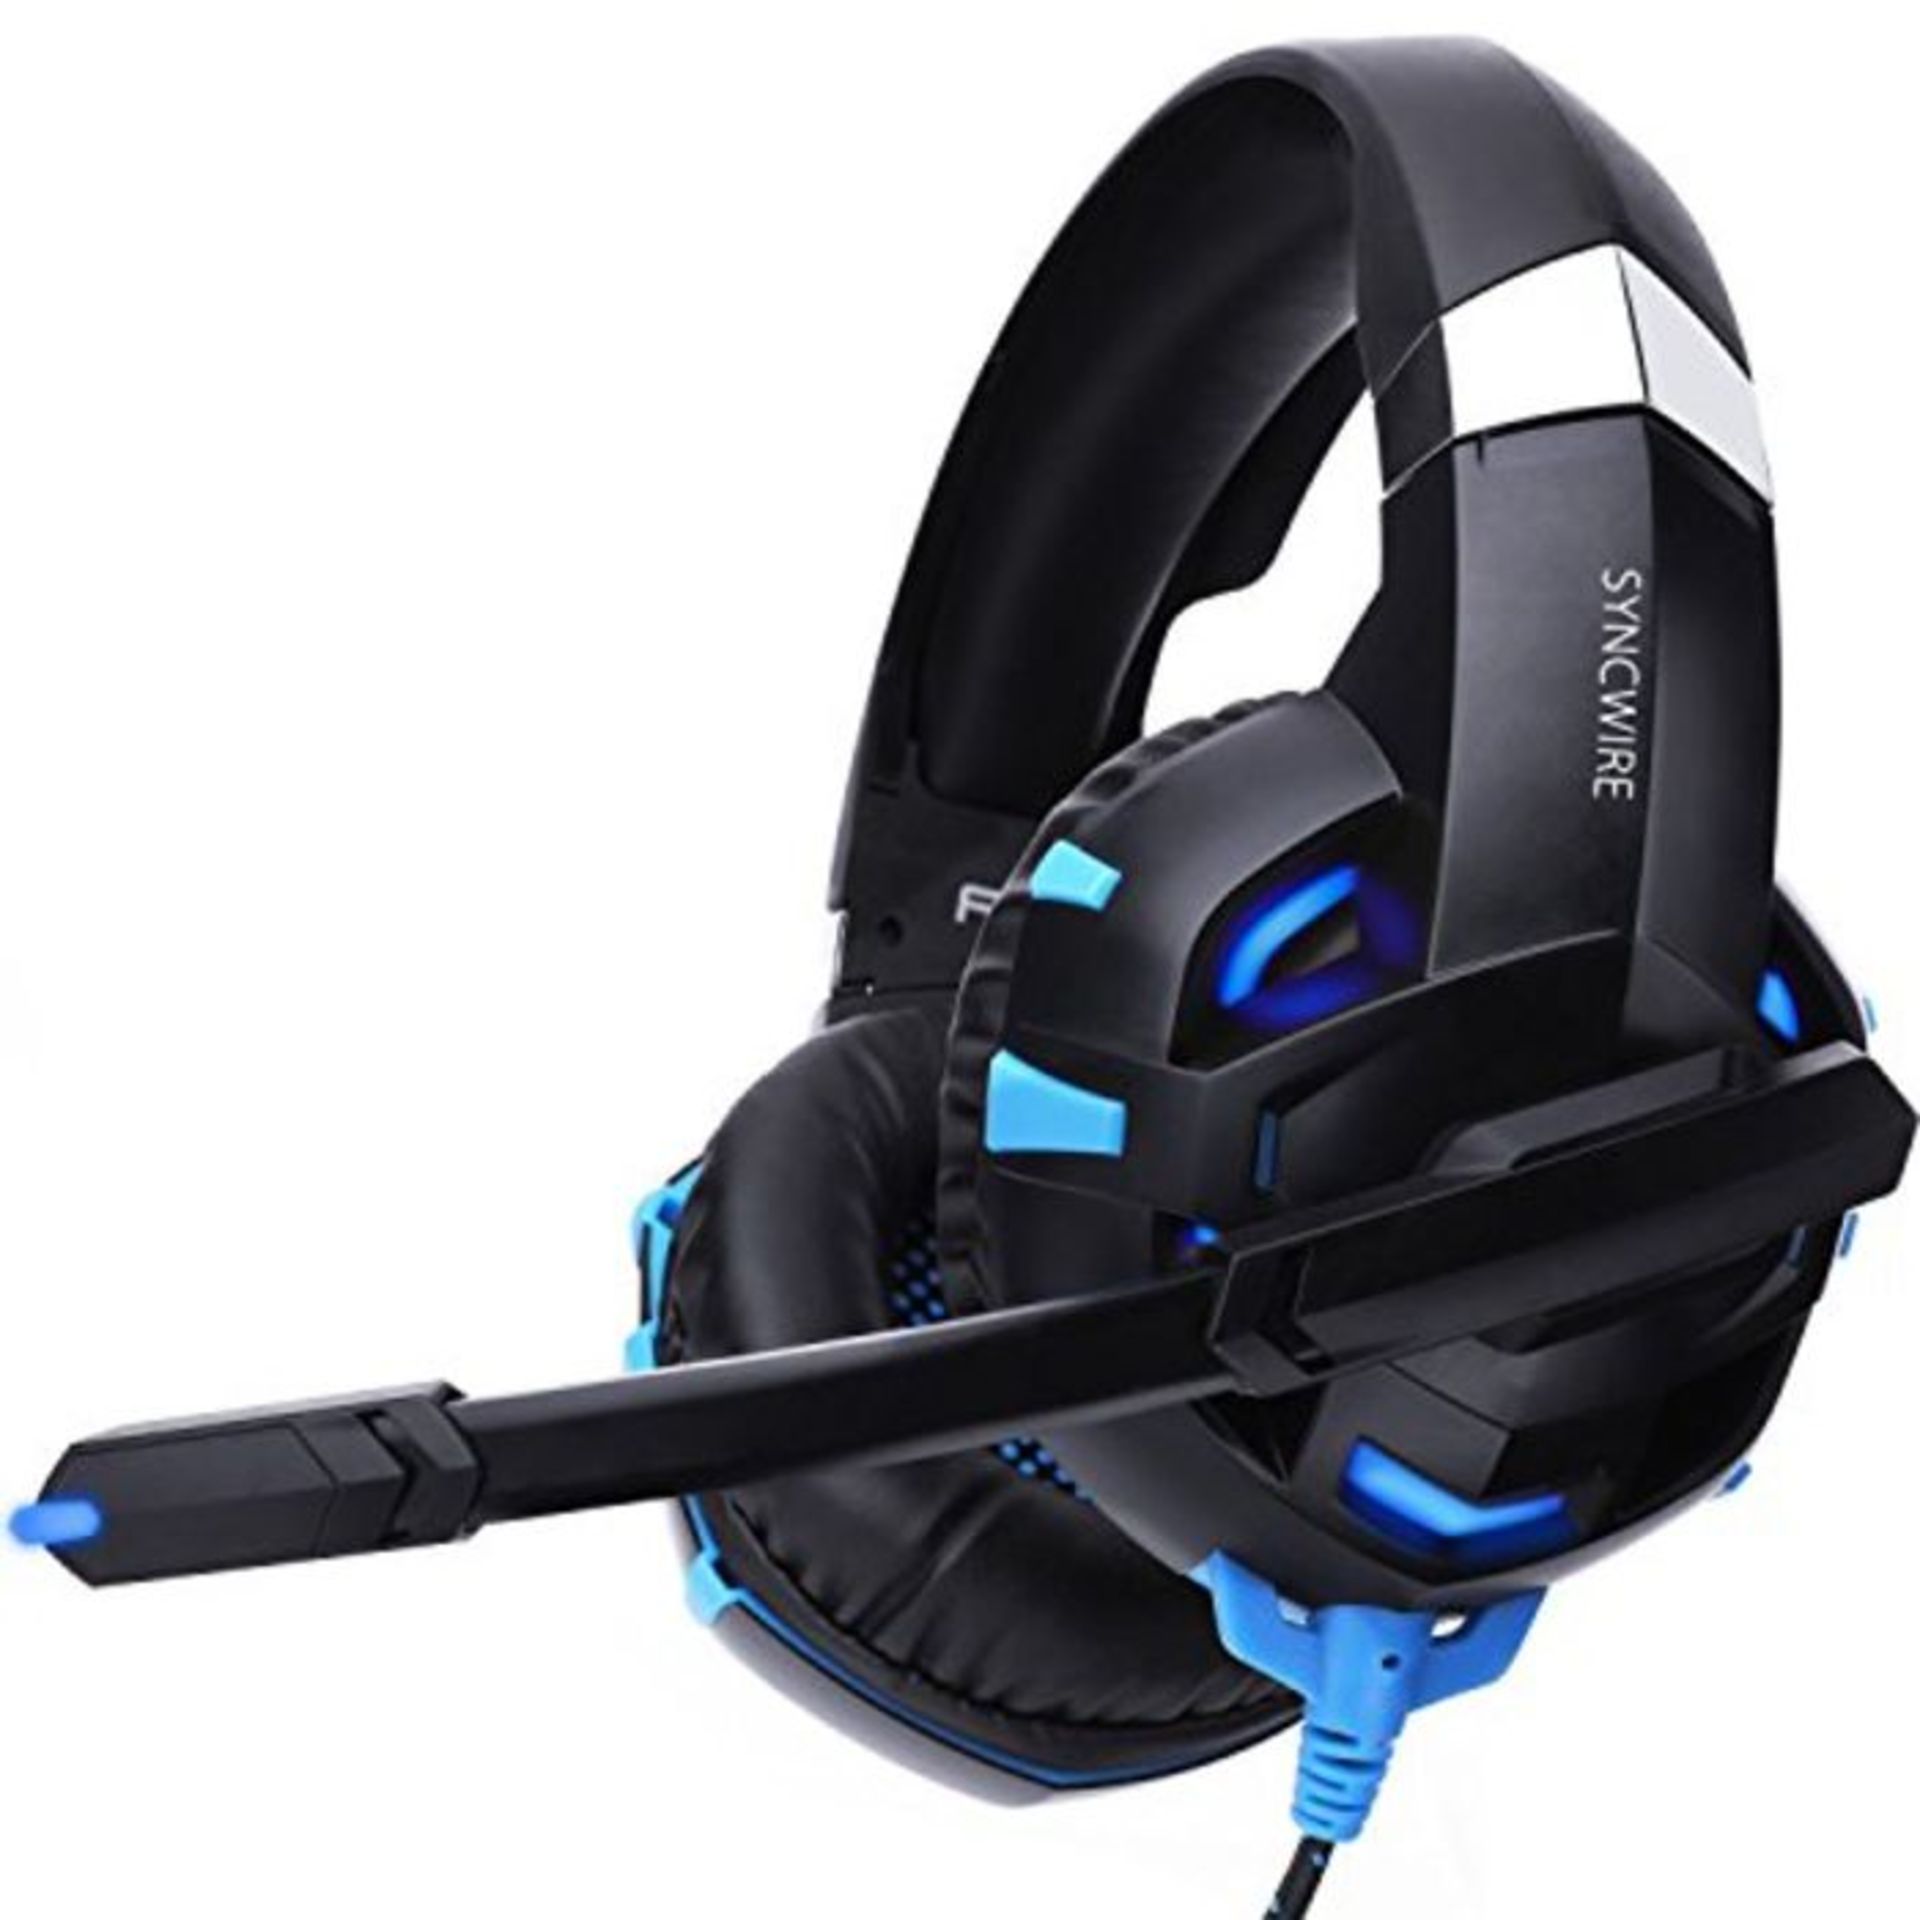 Syncwire Gaming Headset PS4 Headphones - Surround Sound 7.1 Headphones Gamer Head Set